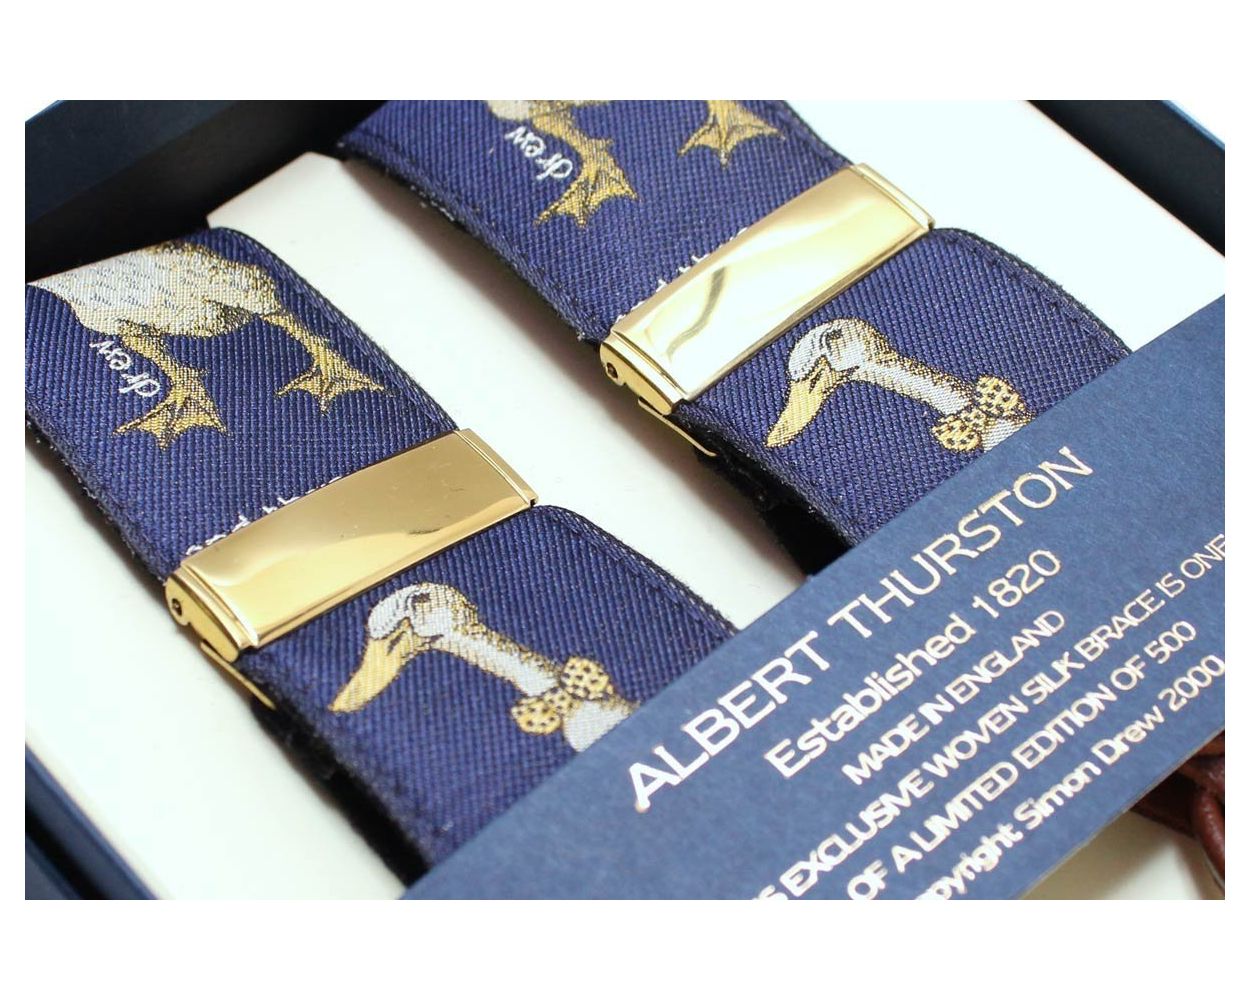 https://www.robertold.co.uk/media/catalog/product/cache/6cabeaa6ab42a75a32656bf08785e771/a/l/albert-thurston-silk-braces-tall-and-handsome-duck-03.jpg